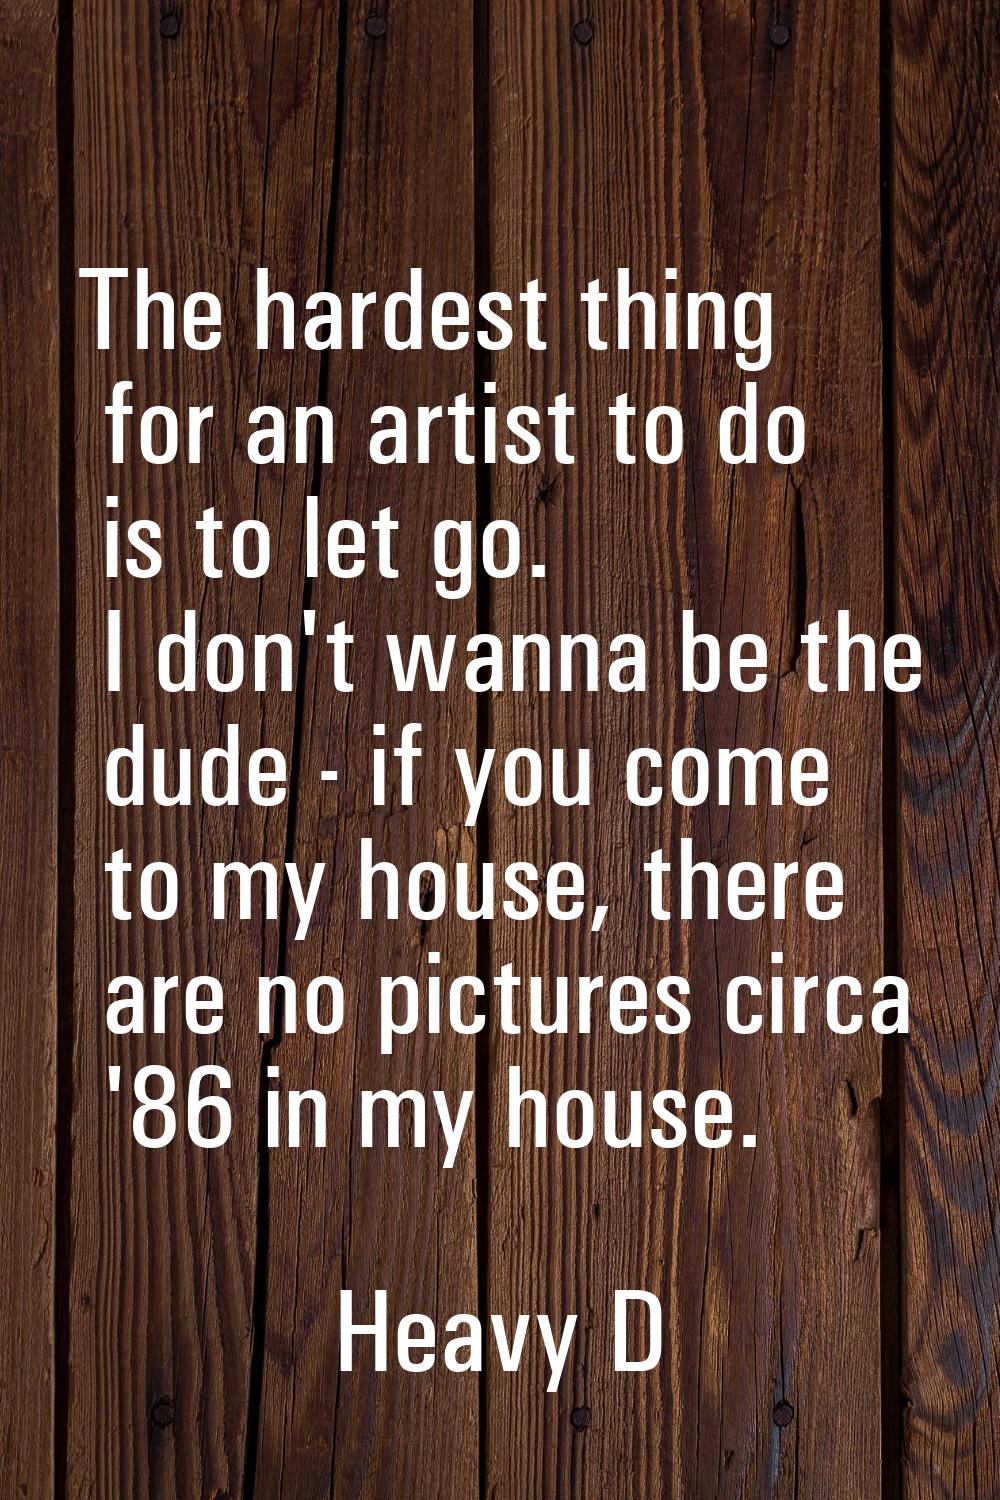 The hardest thing for an artist to do is to let go. I don't wanna be the dude - if you come to my h